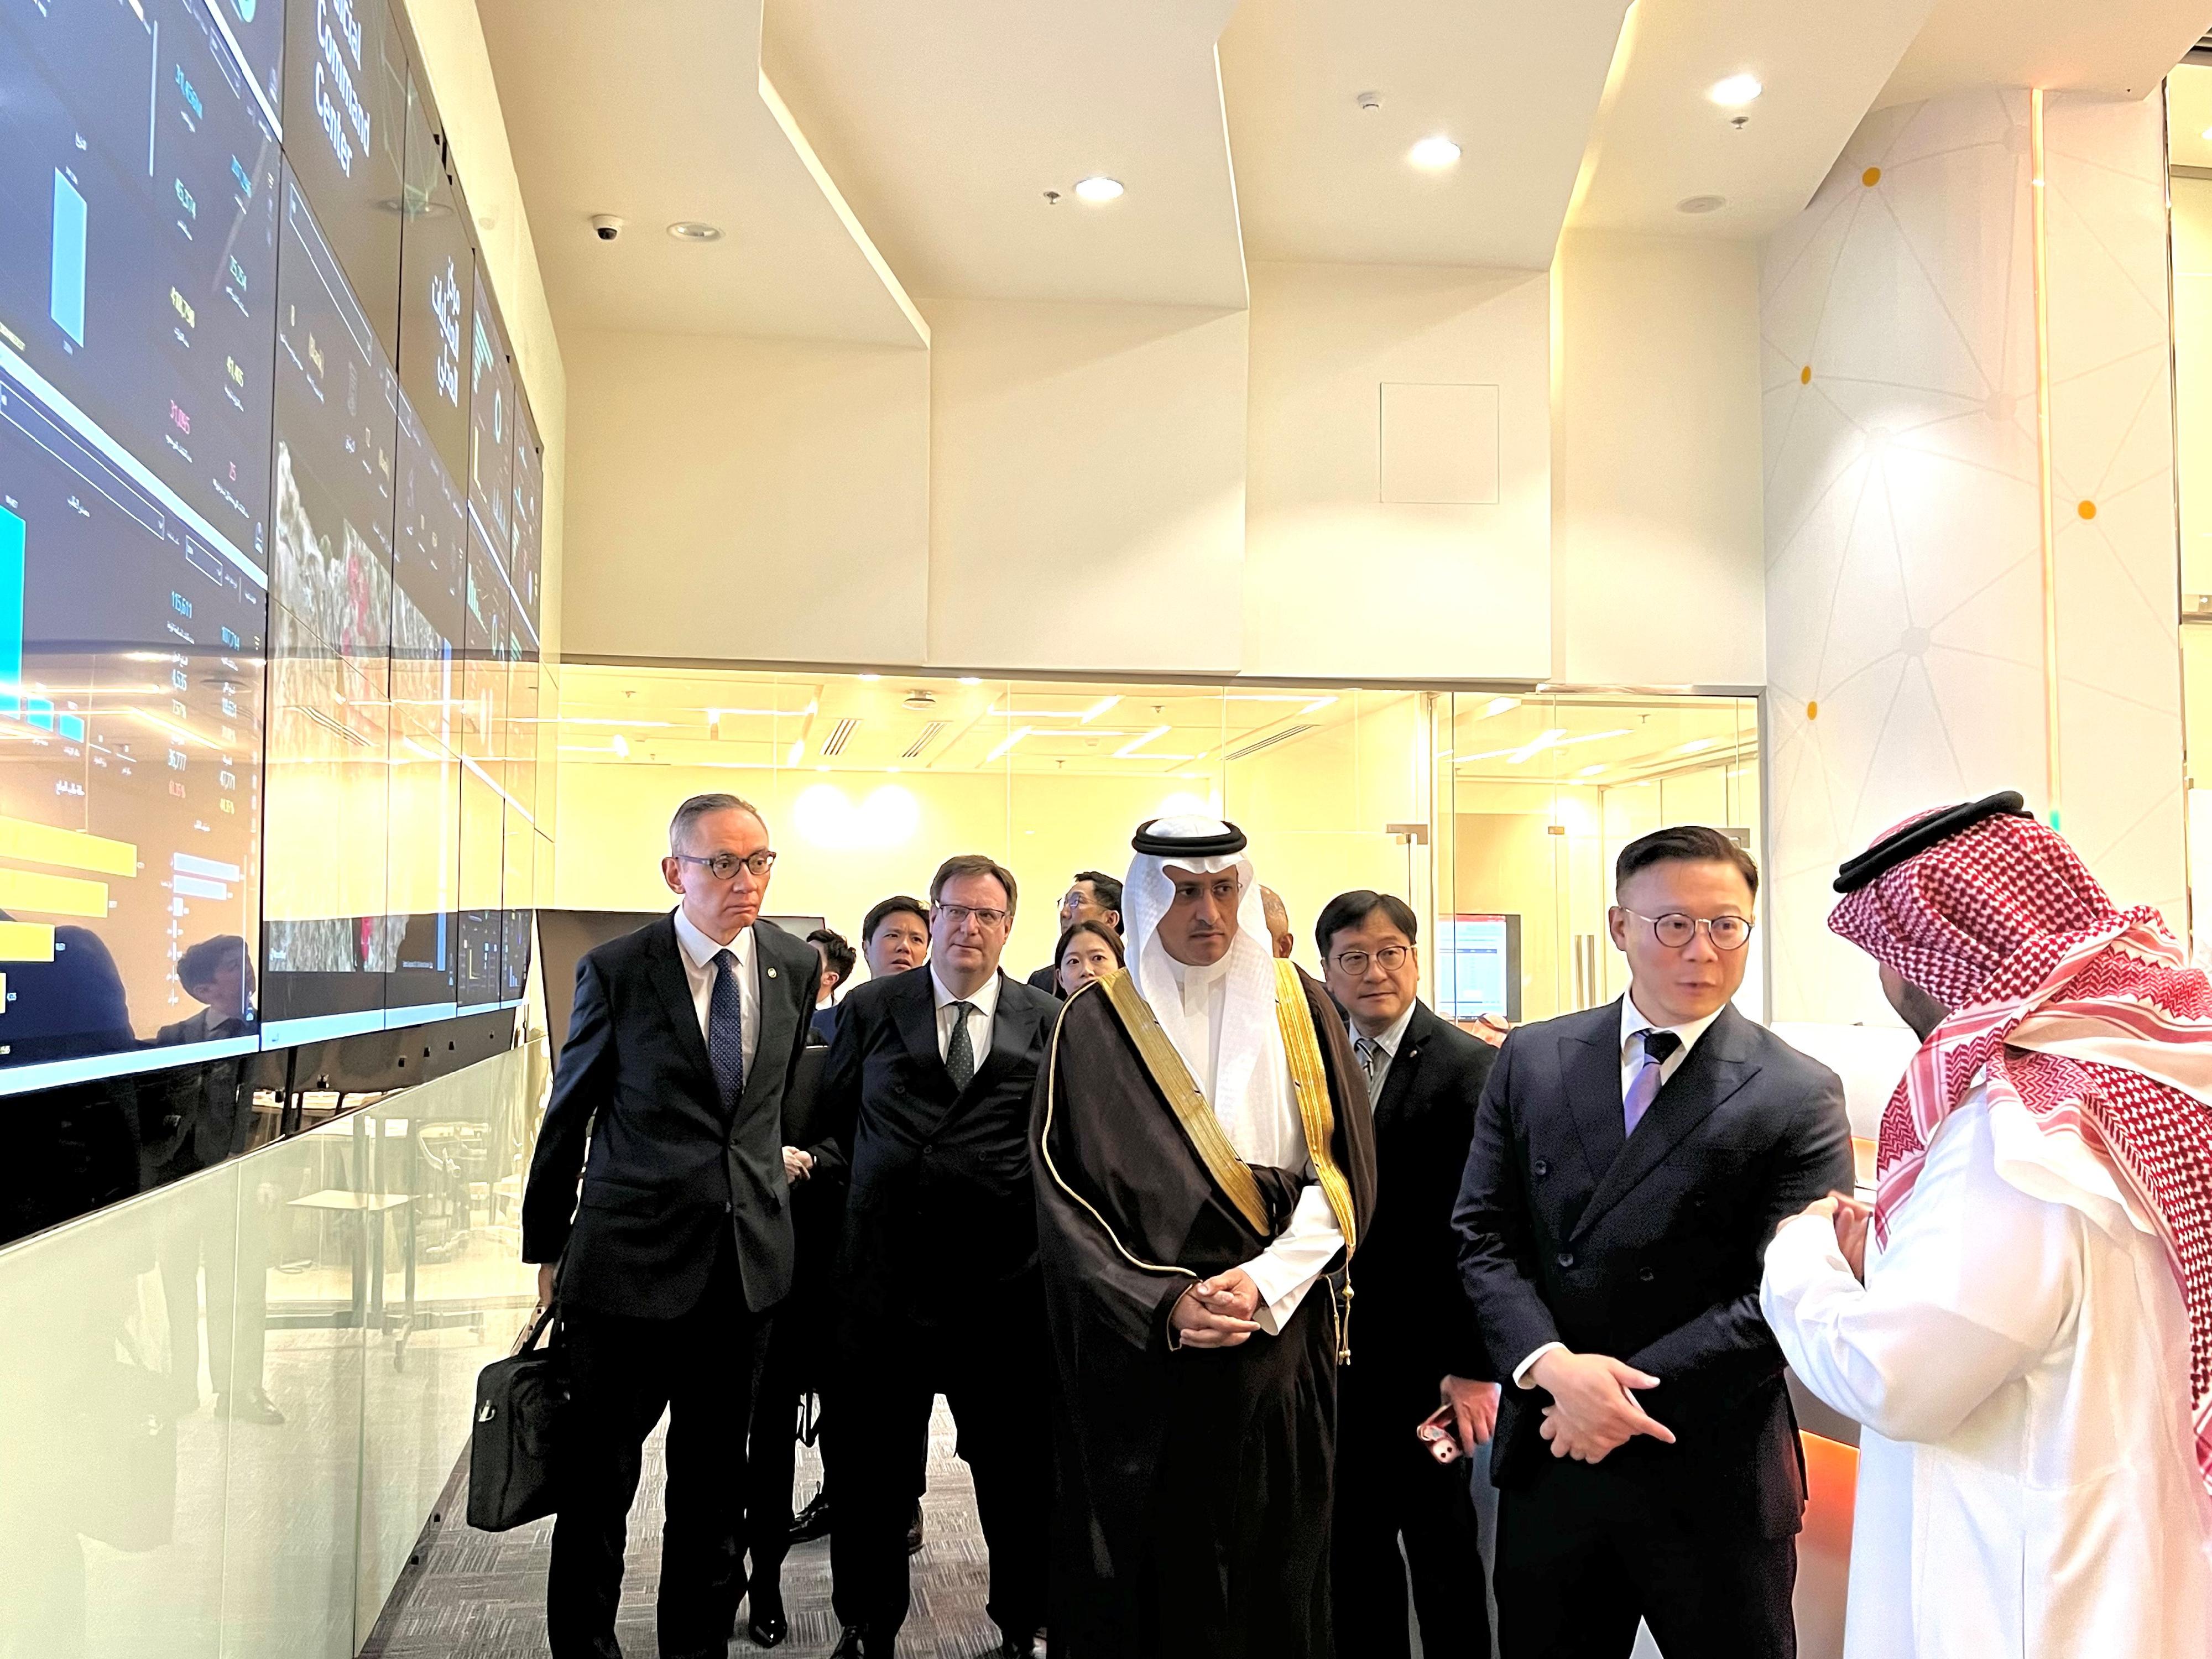 The Deputy Secretary for Justice, Mr Cheung Kwok-kwan (second right), meets with the Vice-Minister of Justice of the Kingdom of Saudi Arabia, Dr Najem bin Abdullah al-Zaid (fourth right), in Riyadh, Saudi Arabia, on March 4 (Riyadh time) to learn about the use of technology in the management of court cases in Saudi Arabia.
